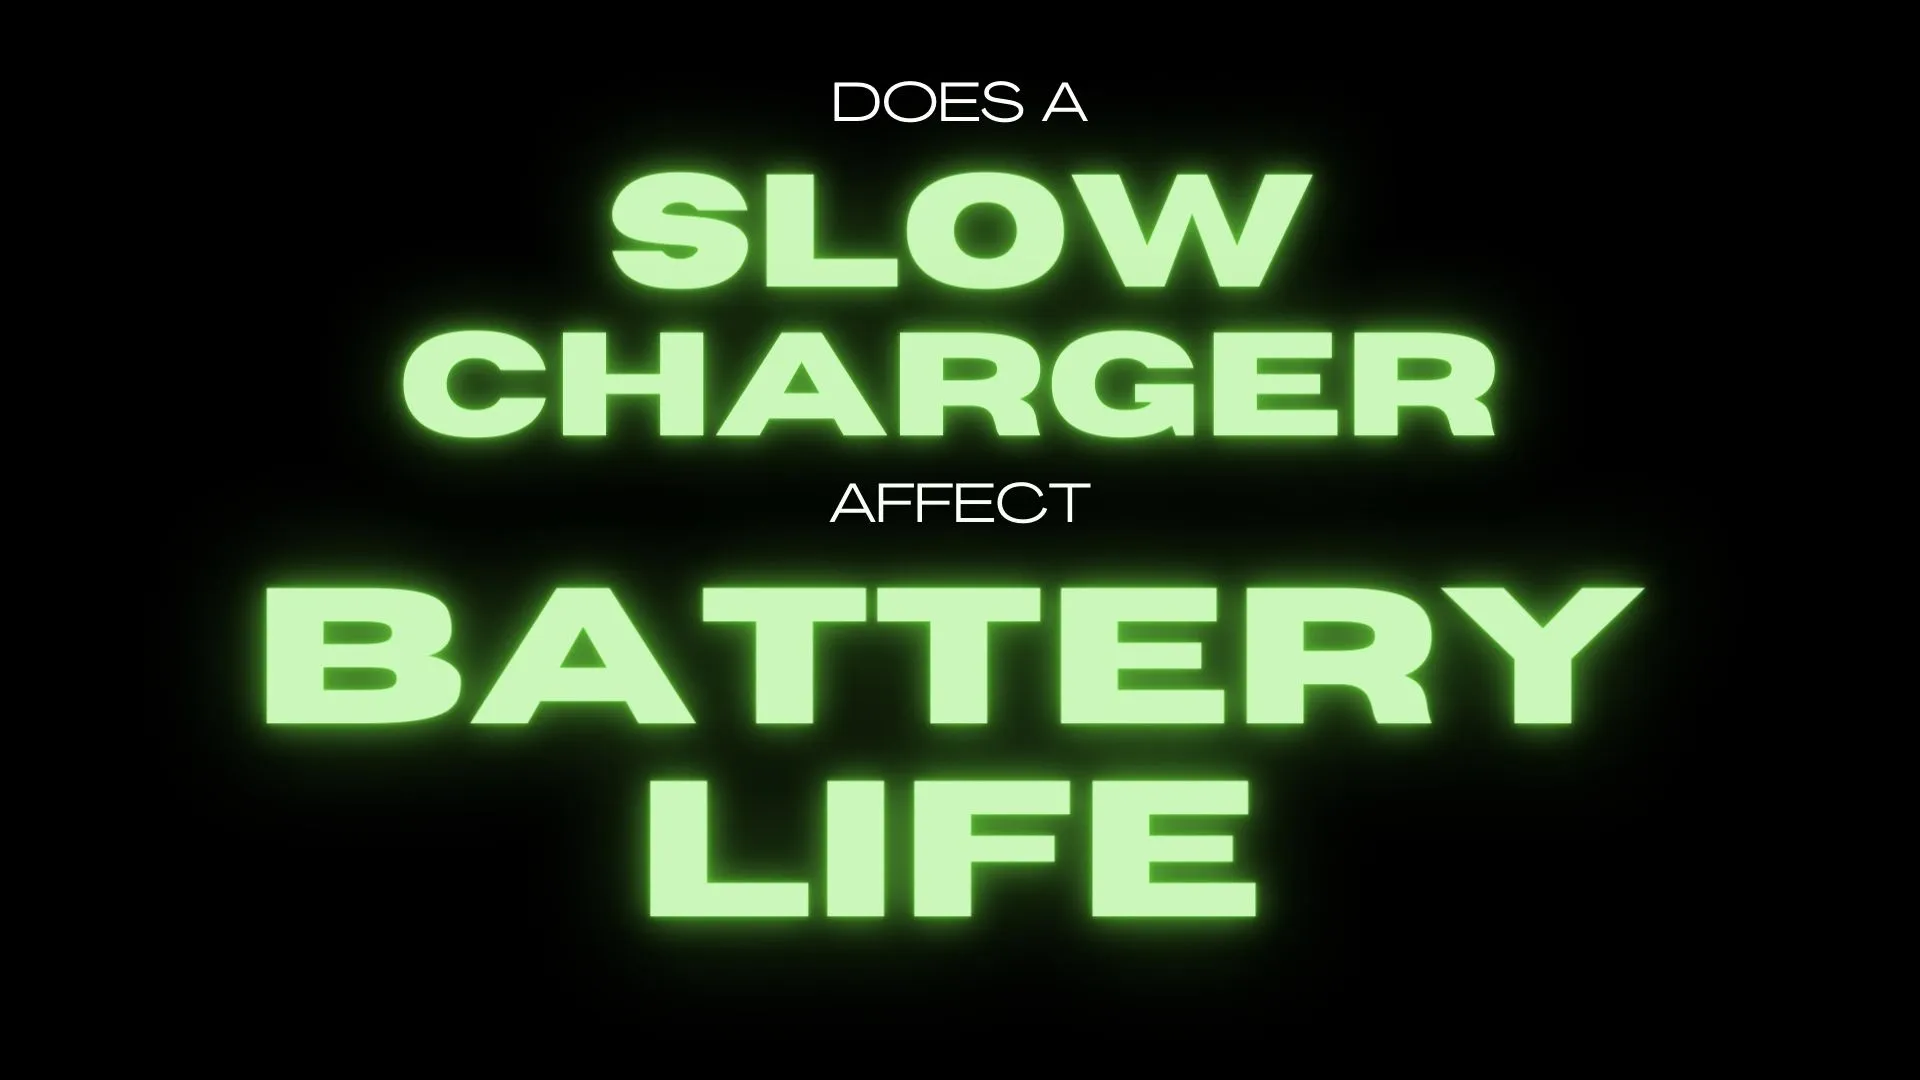 Does a Slow Charger Affect Battery Life